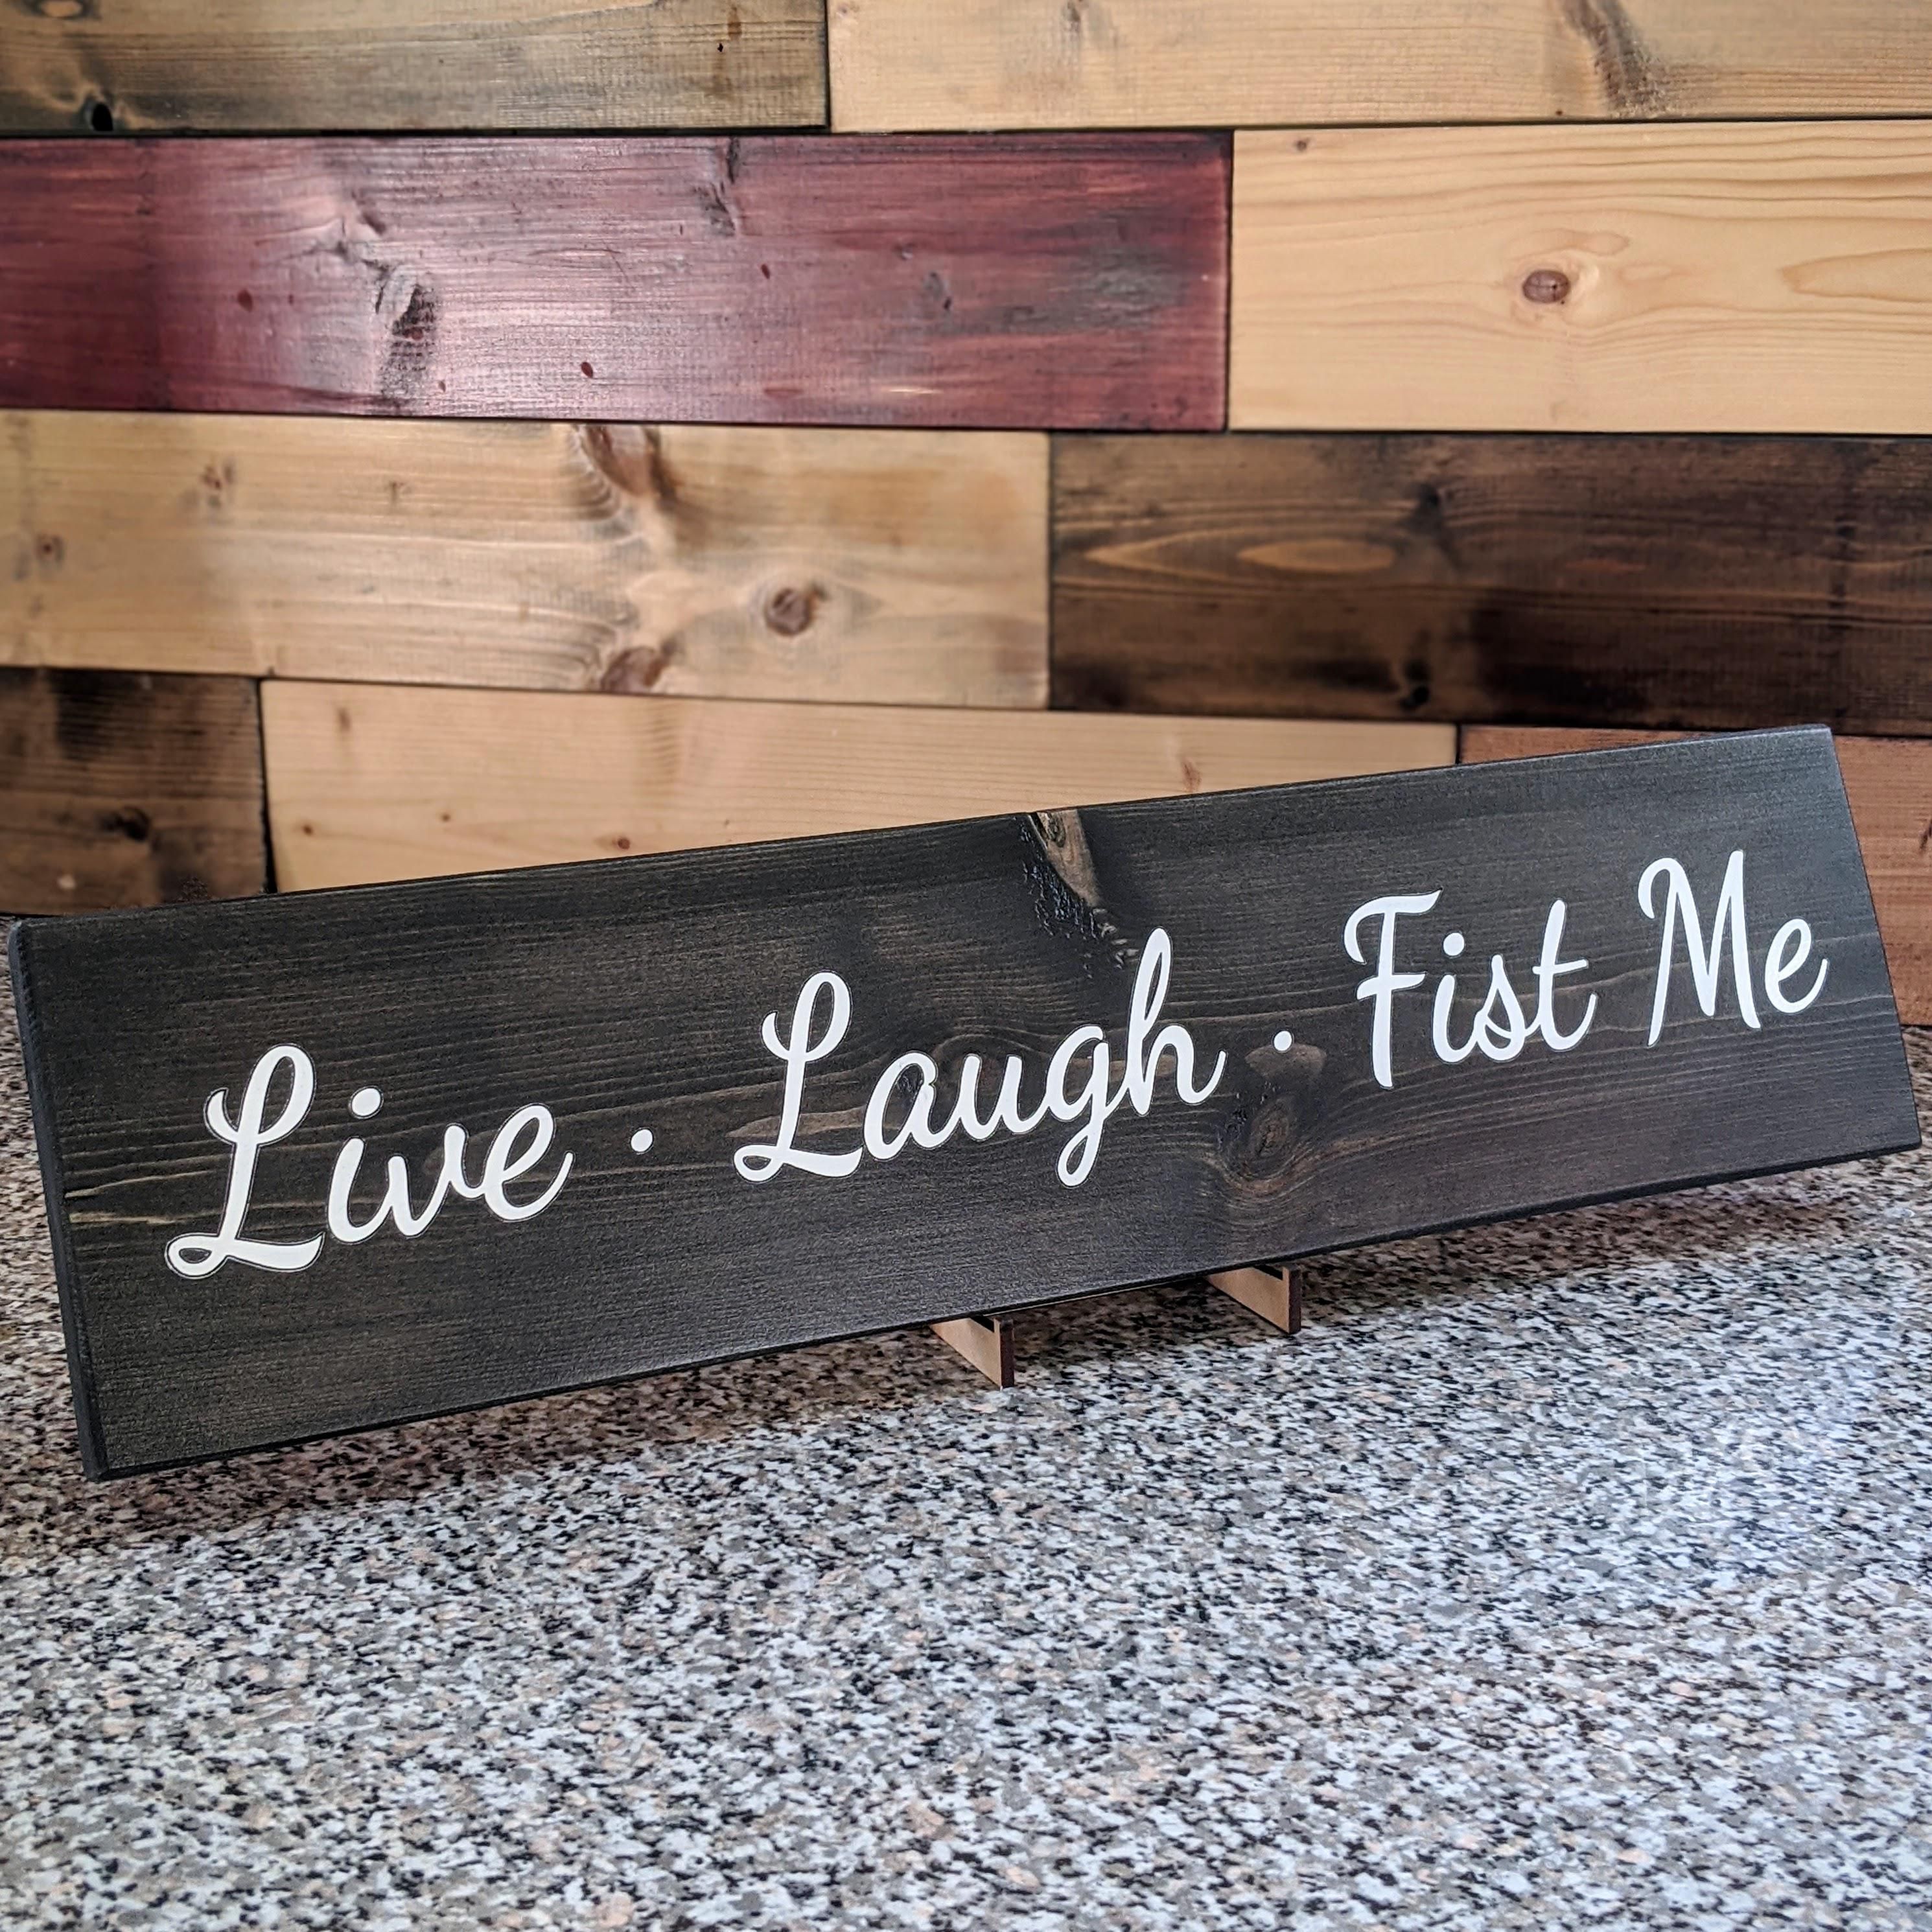 I make these wood signs for fun, sometimes I get odd requests..